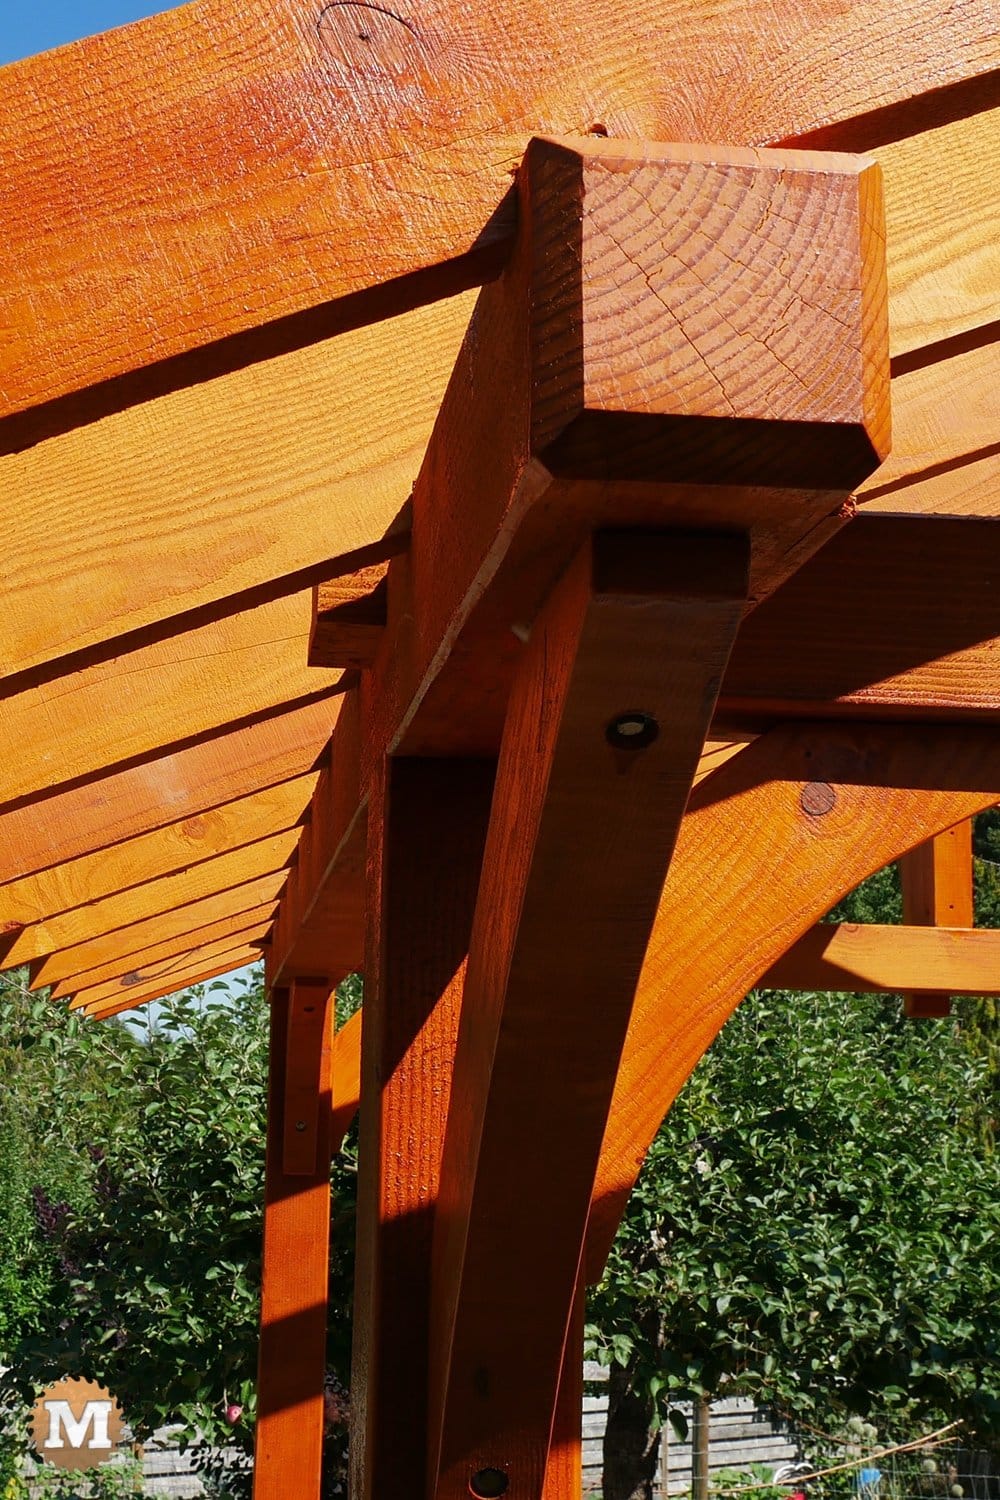 Post and Beam joinery on a Three Gable Pavilion